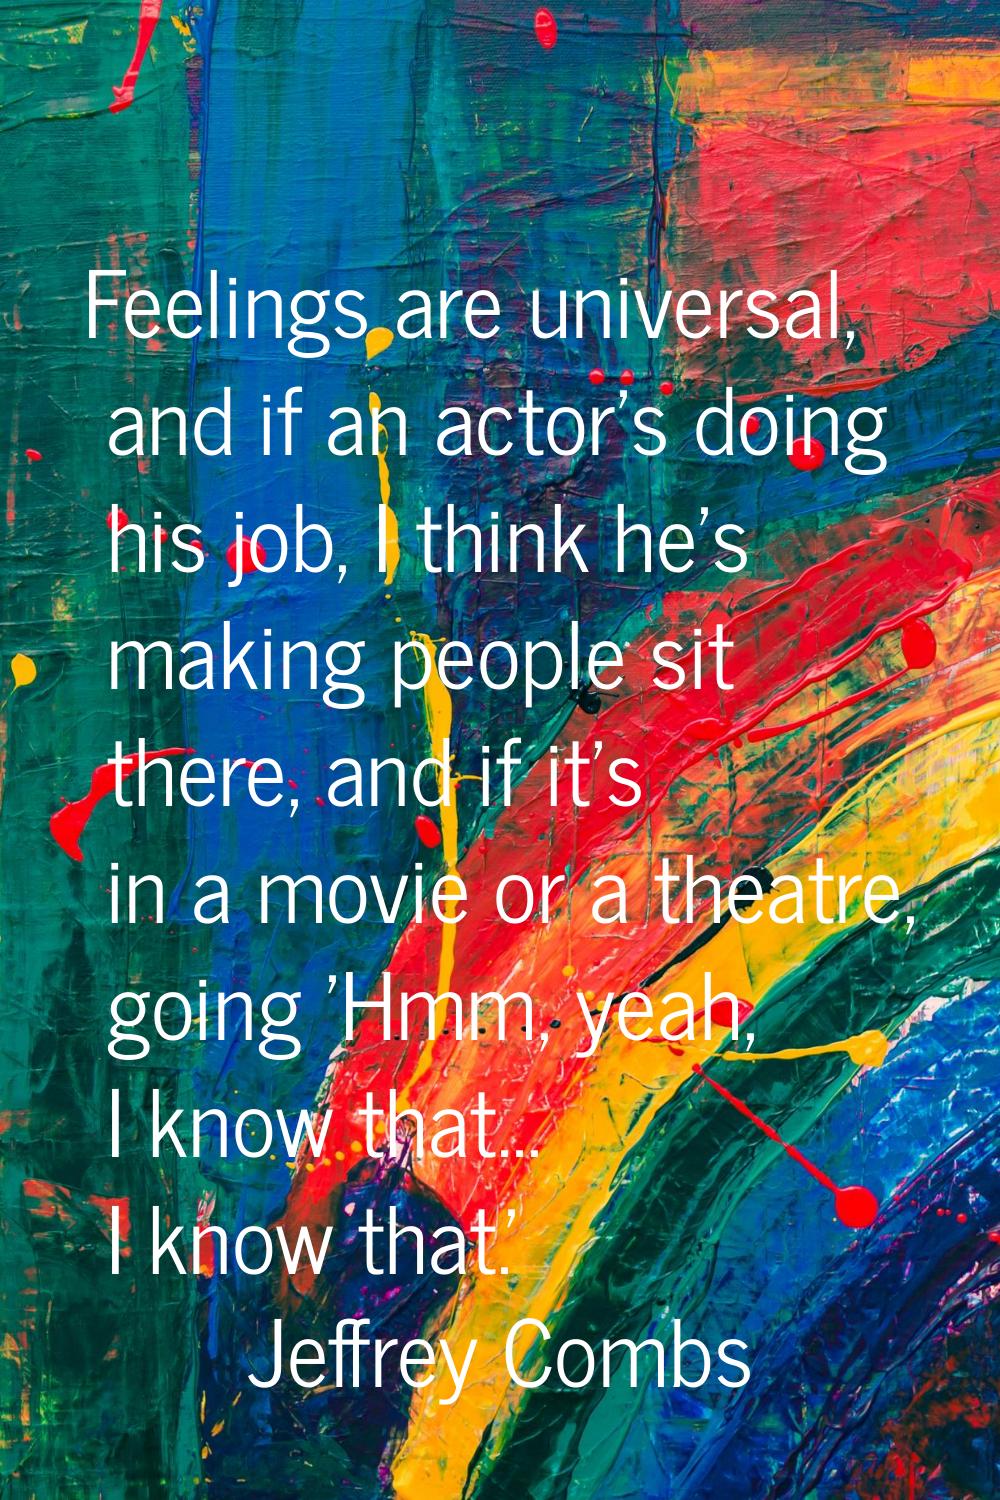 Feelings are universal, and if an actor's doing his job, I think he's making people sit there, and 